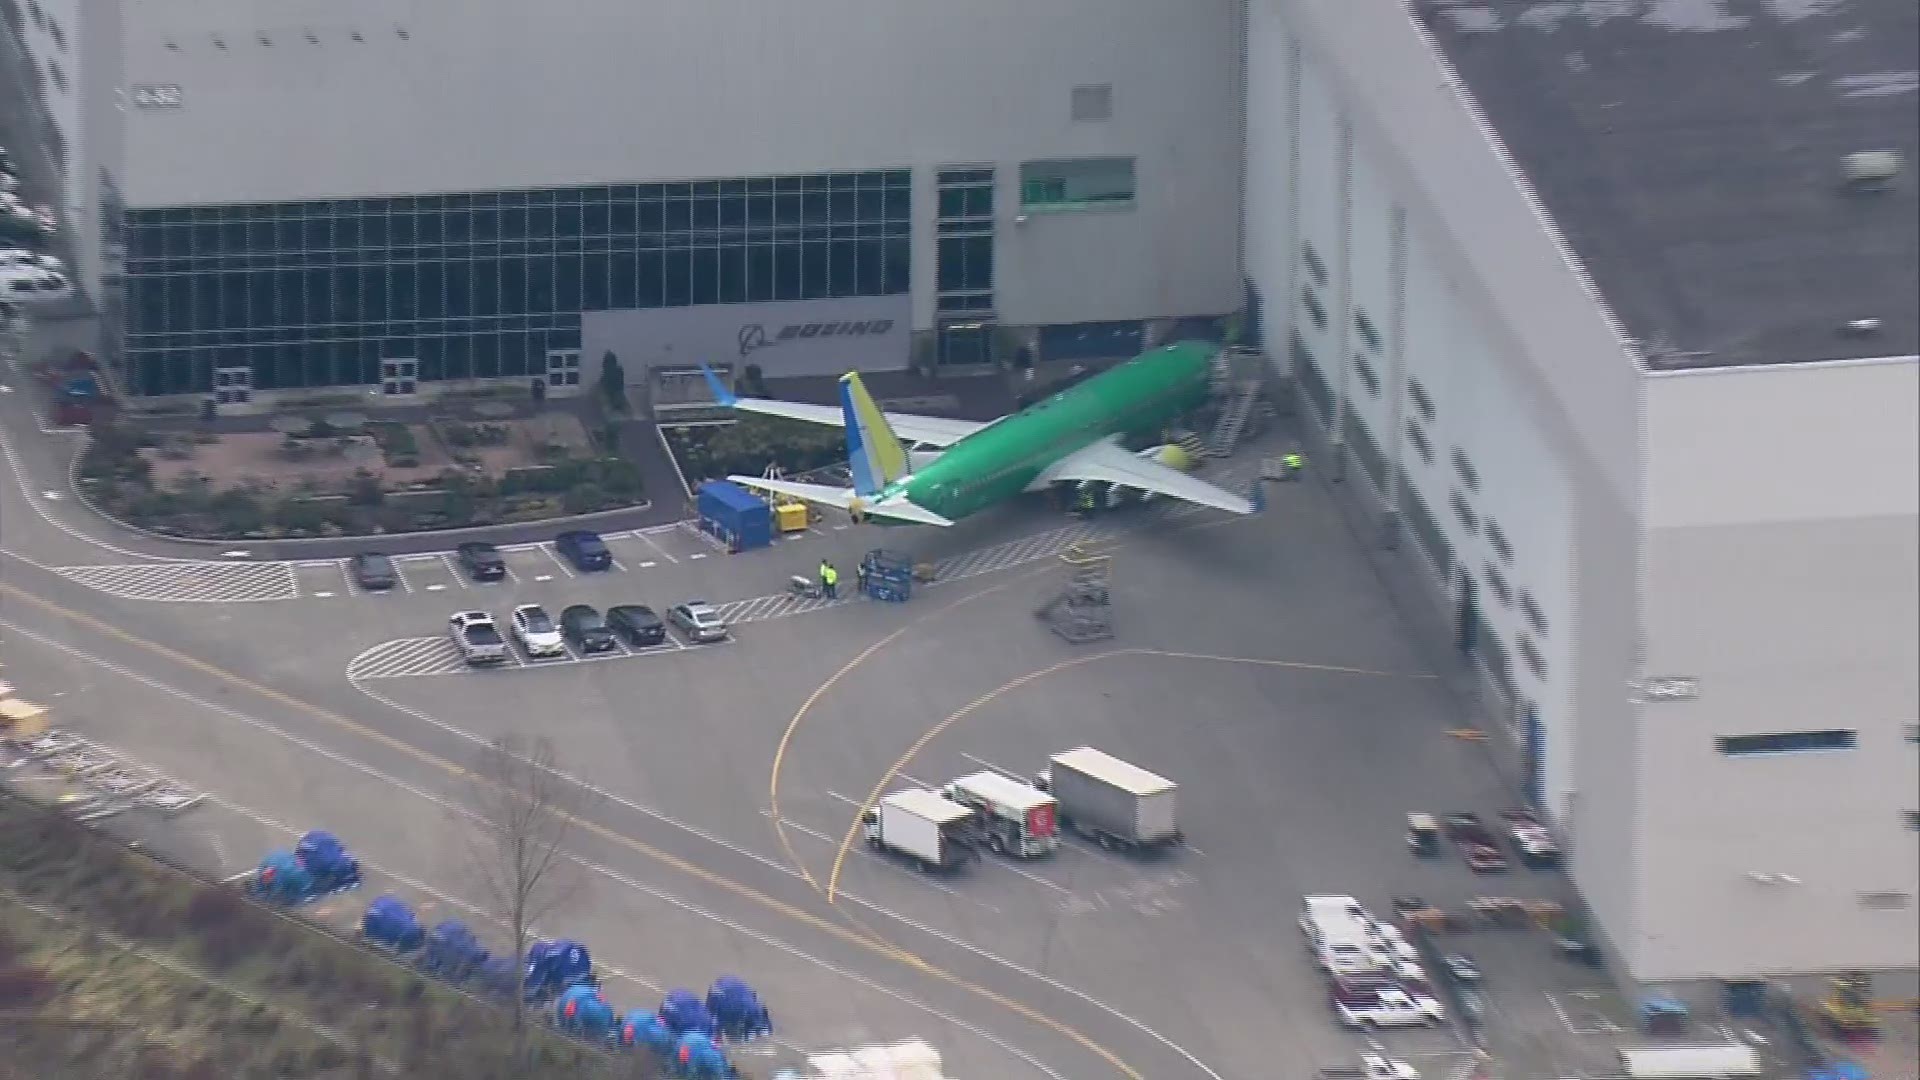 SkyKING flew over Boeing's plant in Renton where 737s are manufactured.